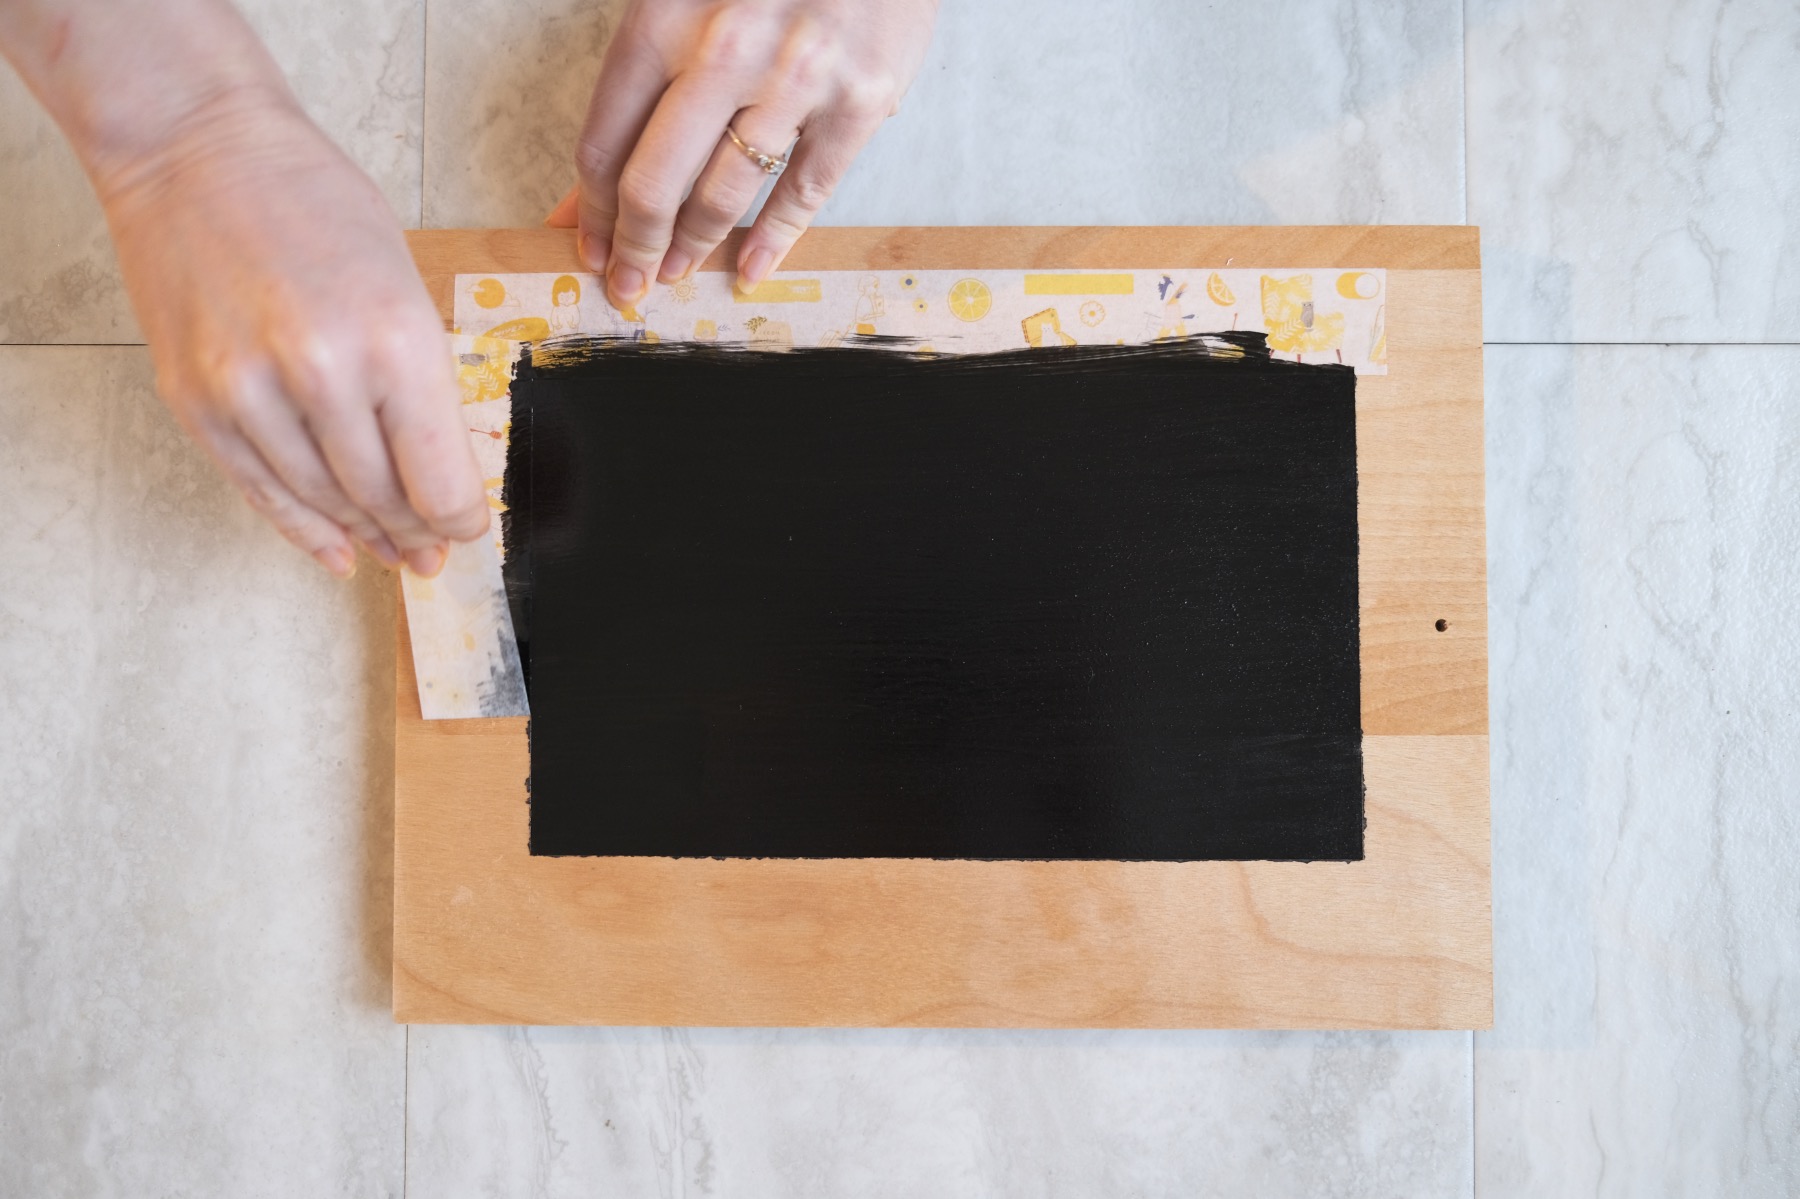 removing washi tape to reveal chalkboard painted tray